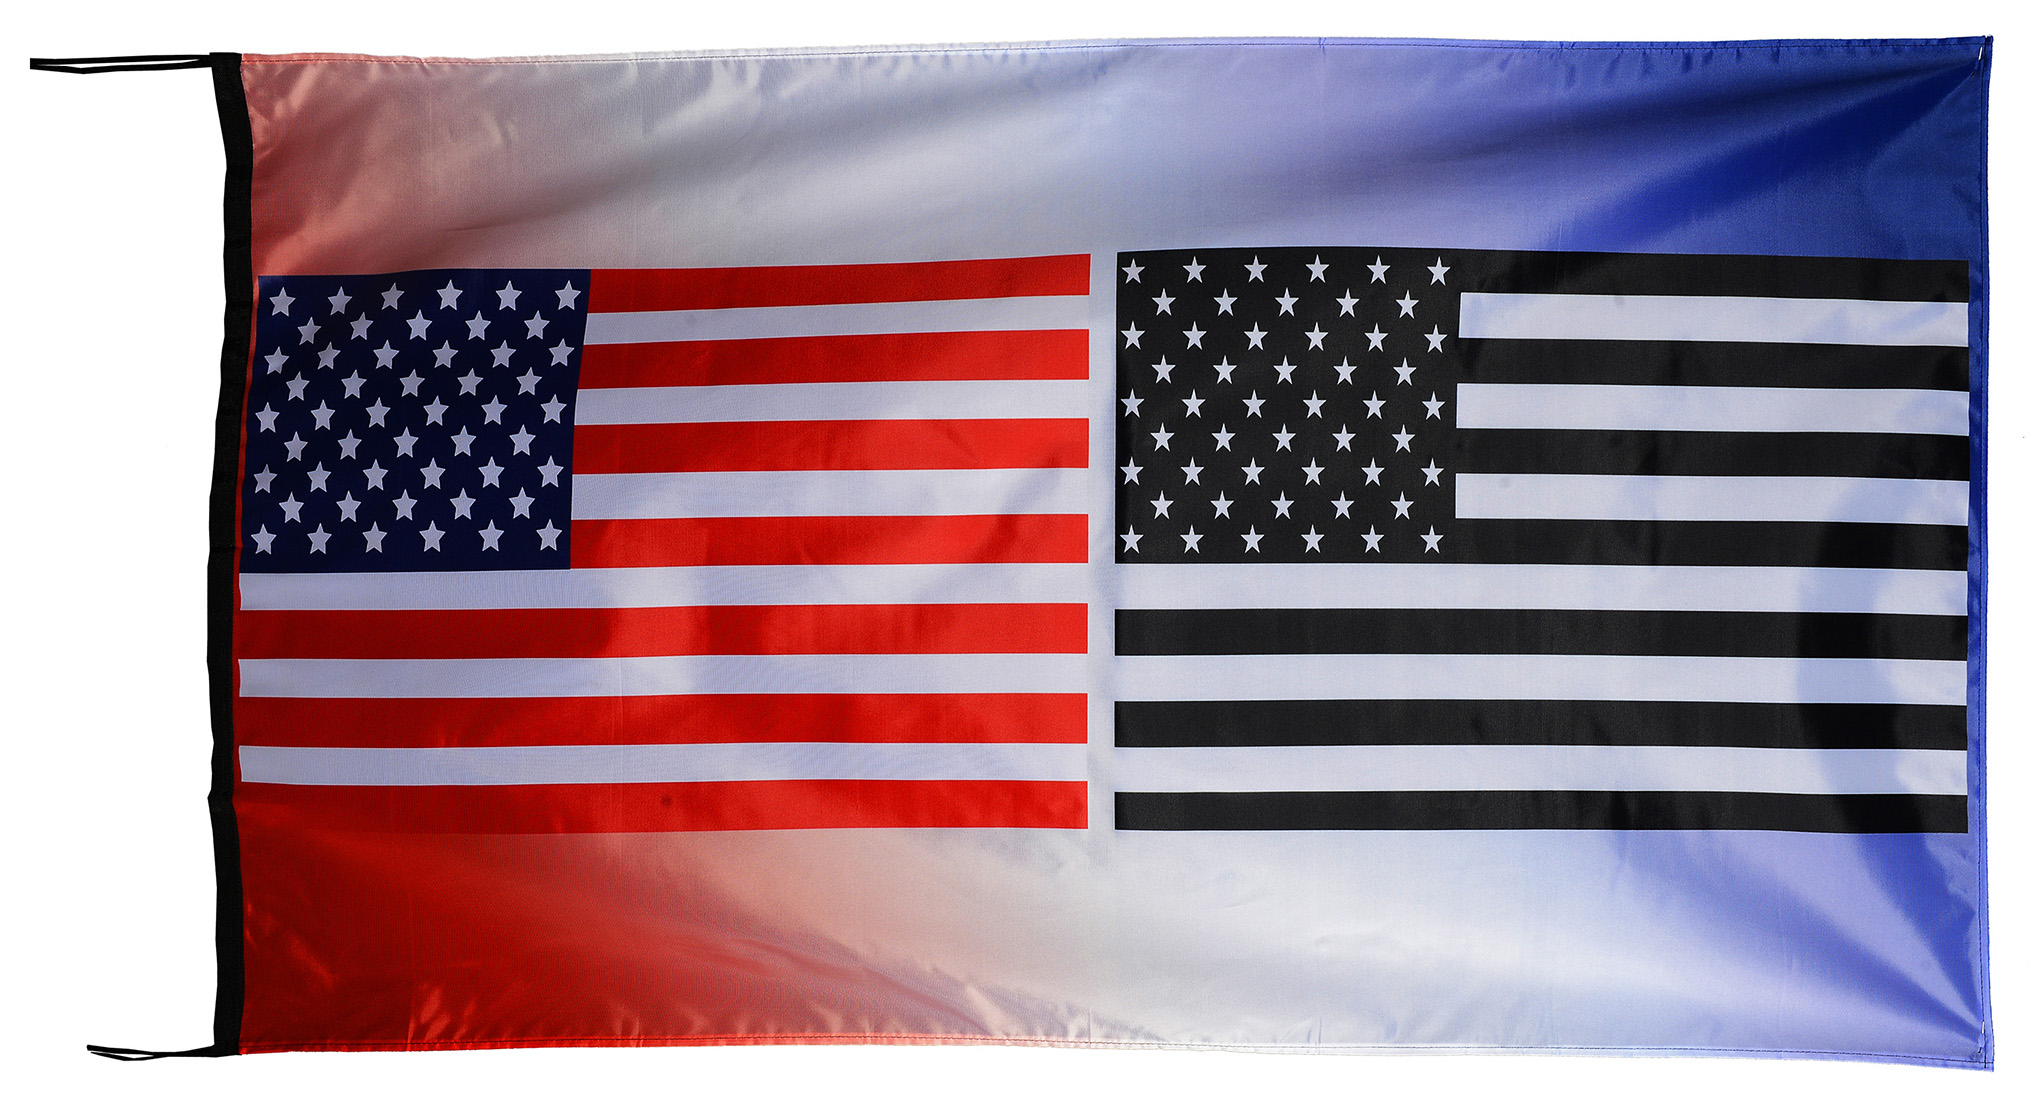 Flag  134 USA / US Country / United States Of America And USA Black And White / Patriotic / Pride Hybrid Weather-Resistant Polyester Outdoor Flag Landscape Banner / Vivid Colors / 3 X 5 FT (150 x 90cm) International Flags for Sale